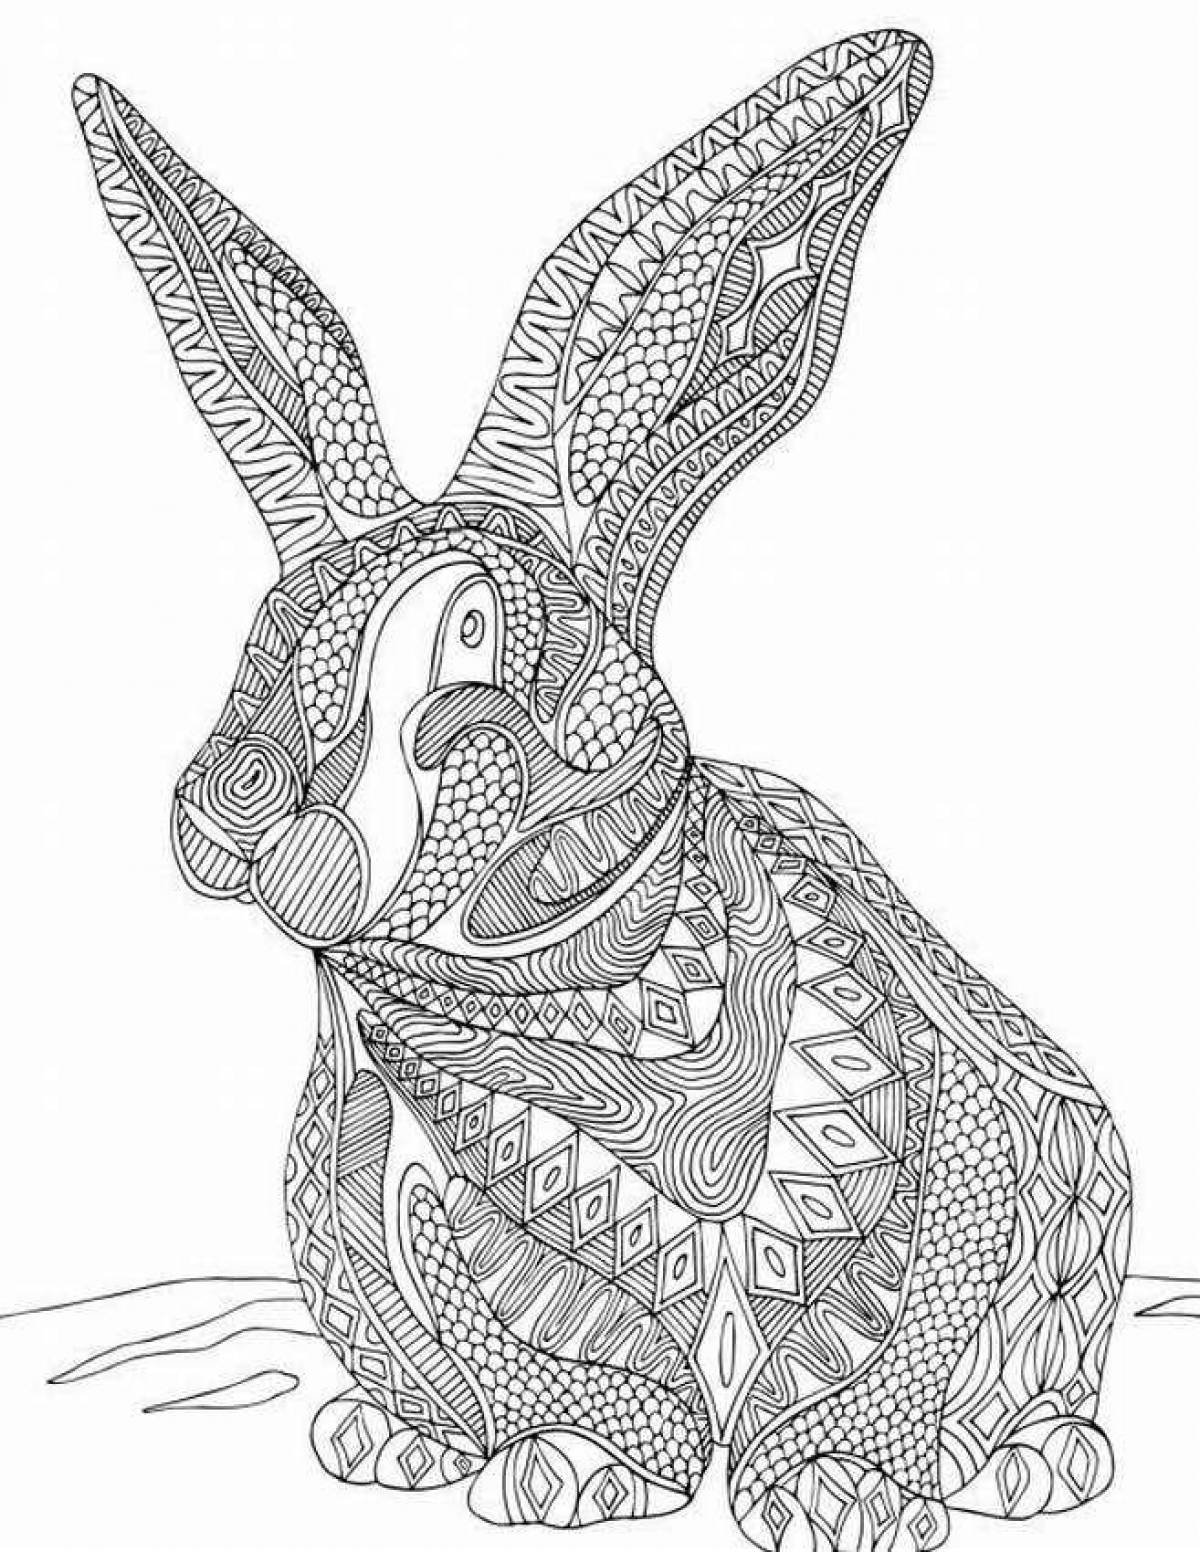 Inspirational anti-stress coloring hare